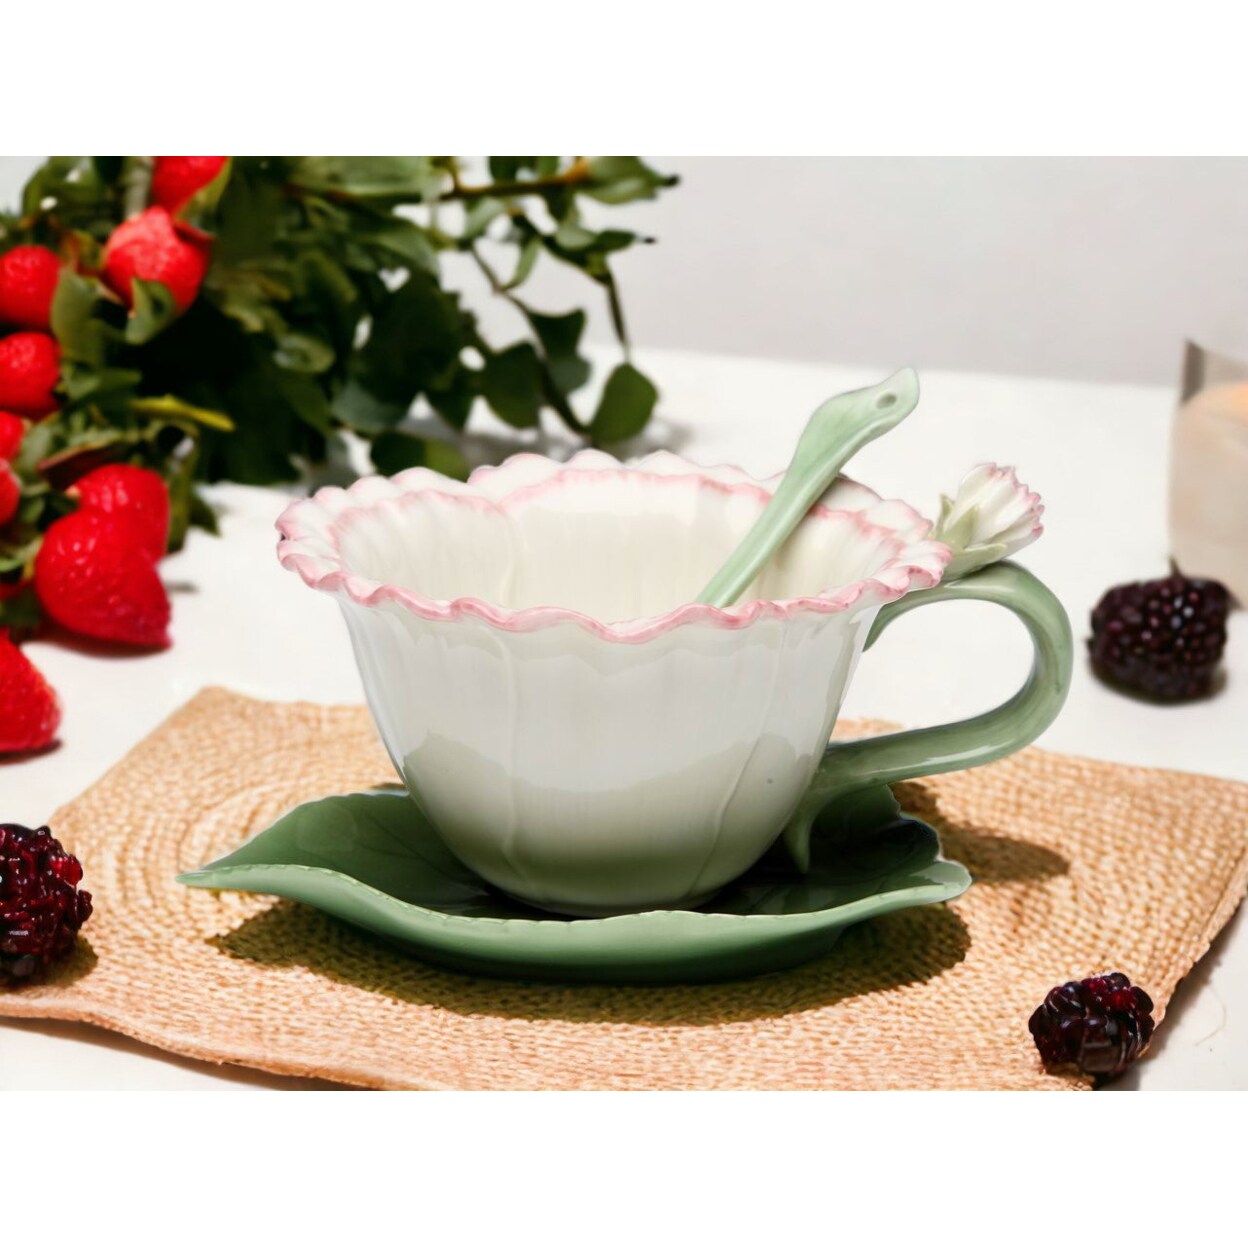 kevinsgiftshoppe Ceramic Carnation Flower Cup and Saucer and Spoon-1 Set   Tea Party Decor Cafe Decor